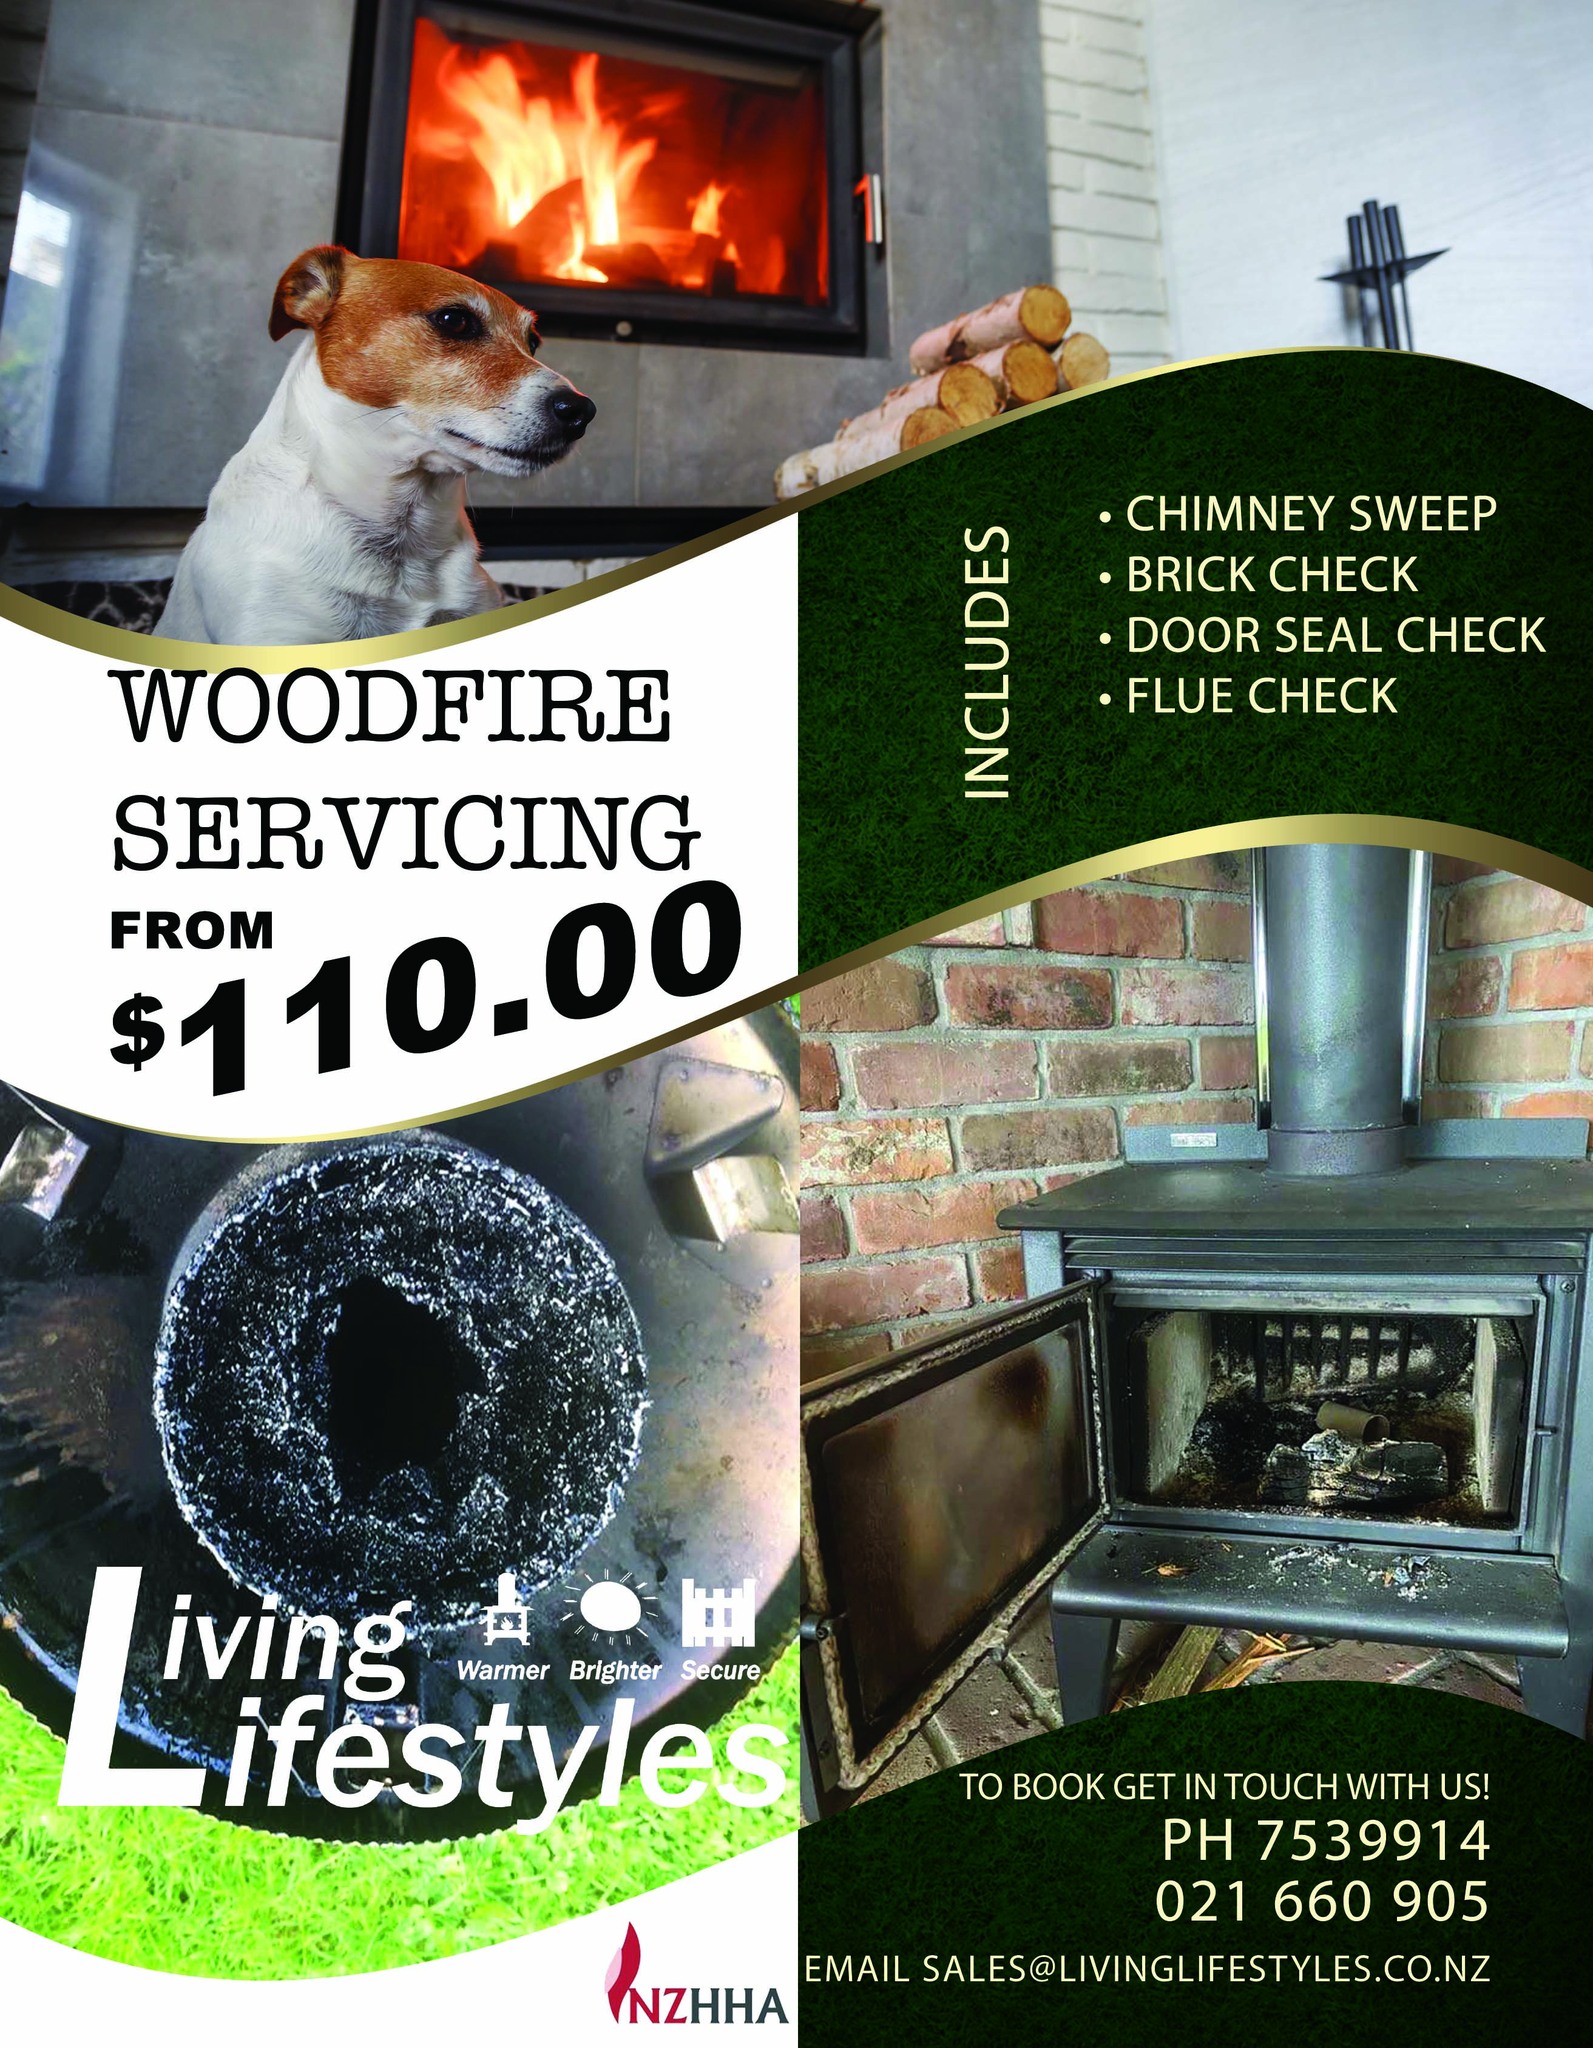 Woodfire Servicing Including Chimney Sweep